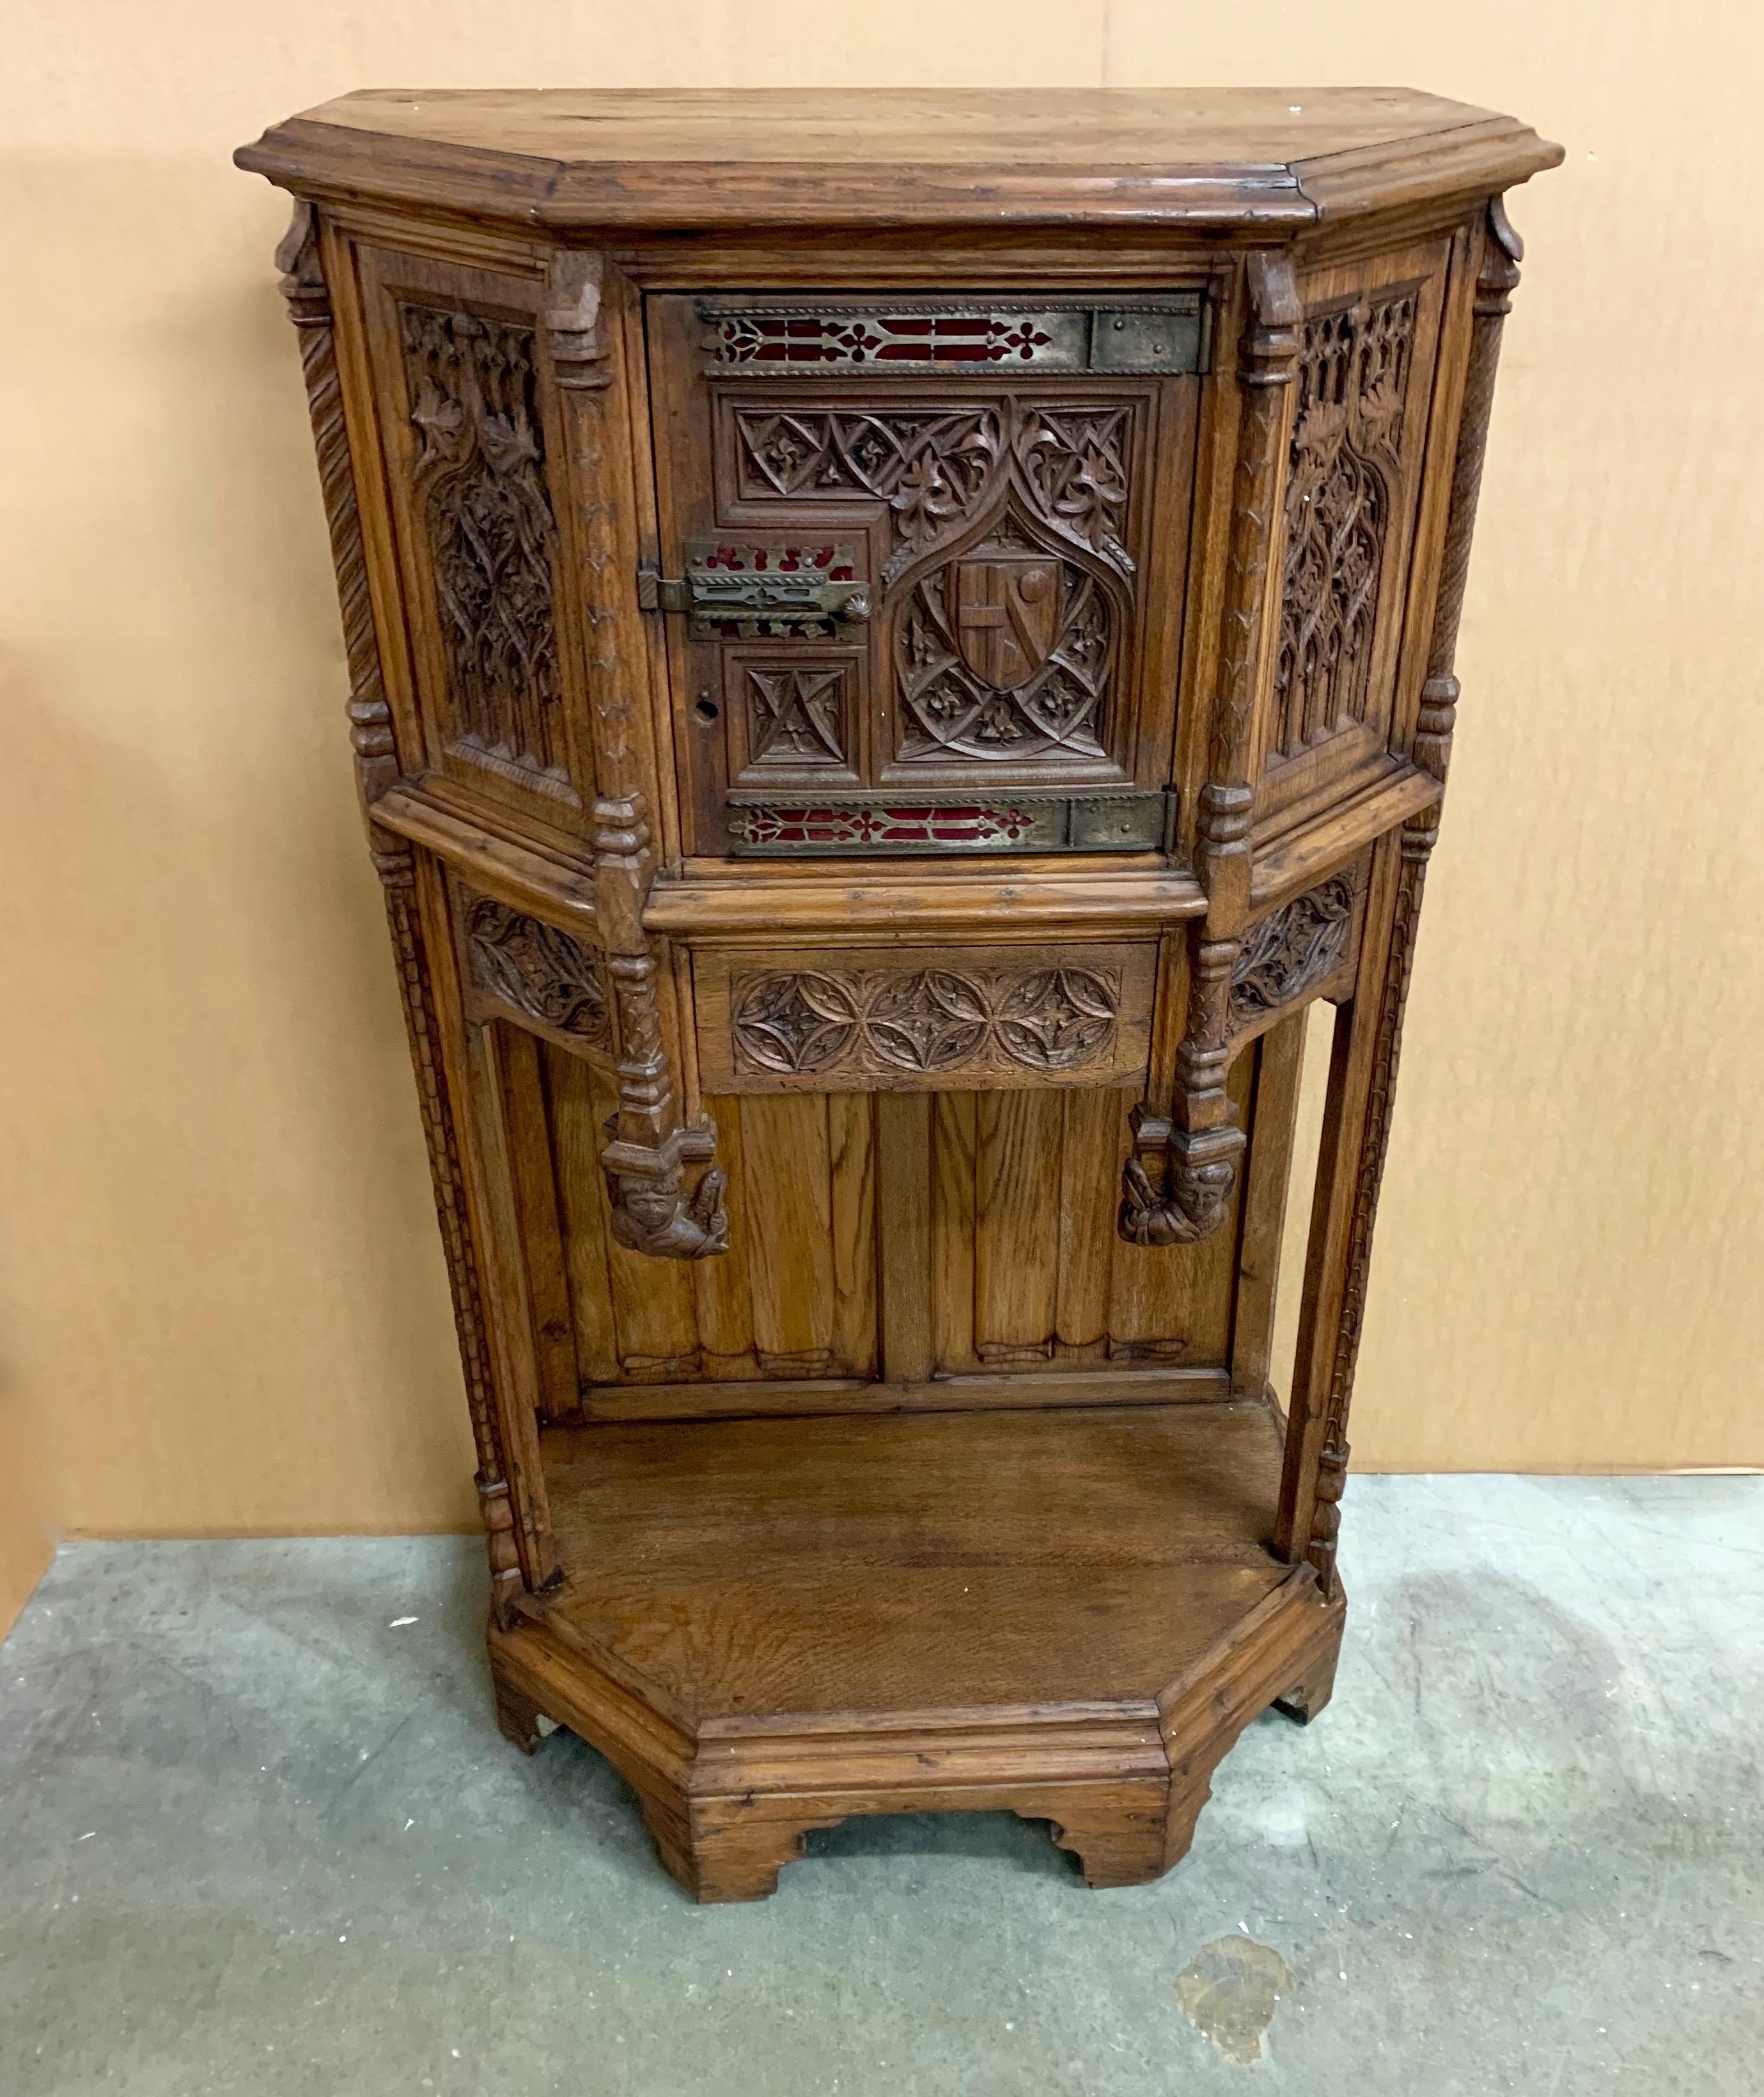 Gothic Revival Drinks Cabinet w Church Window Panels and Angel sculptures For Sale 8